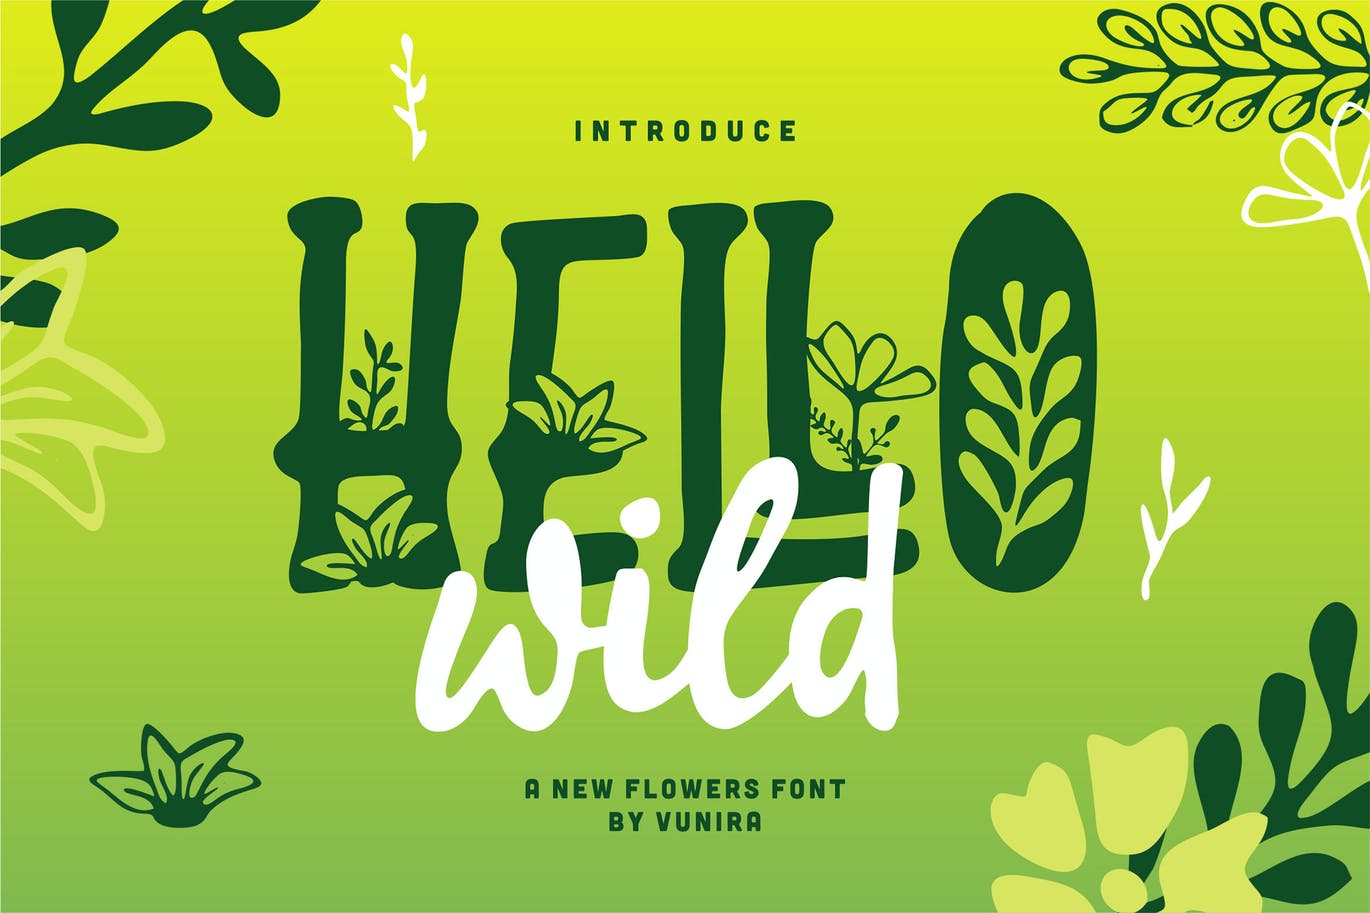 A new flowers font